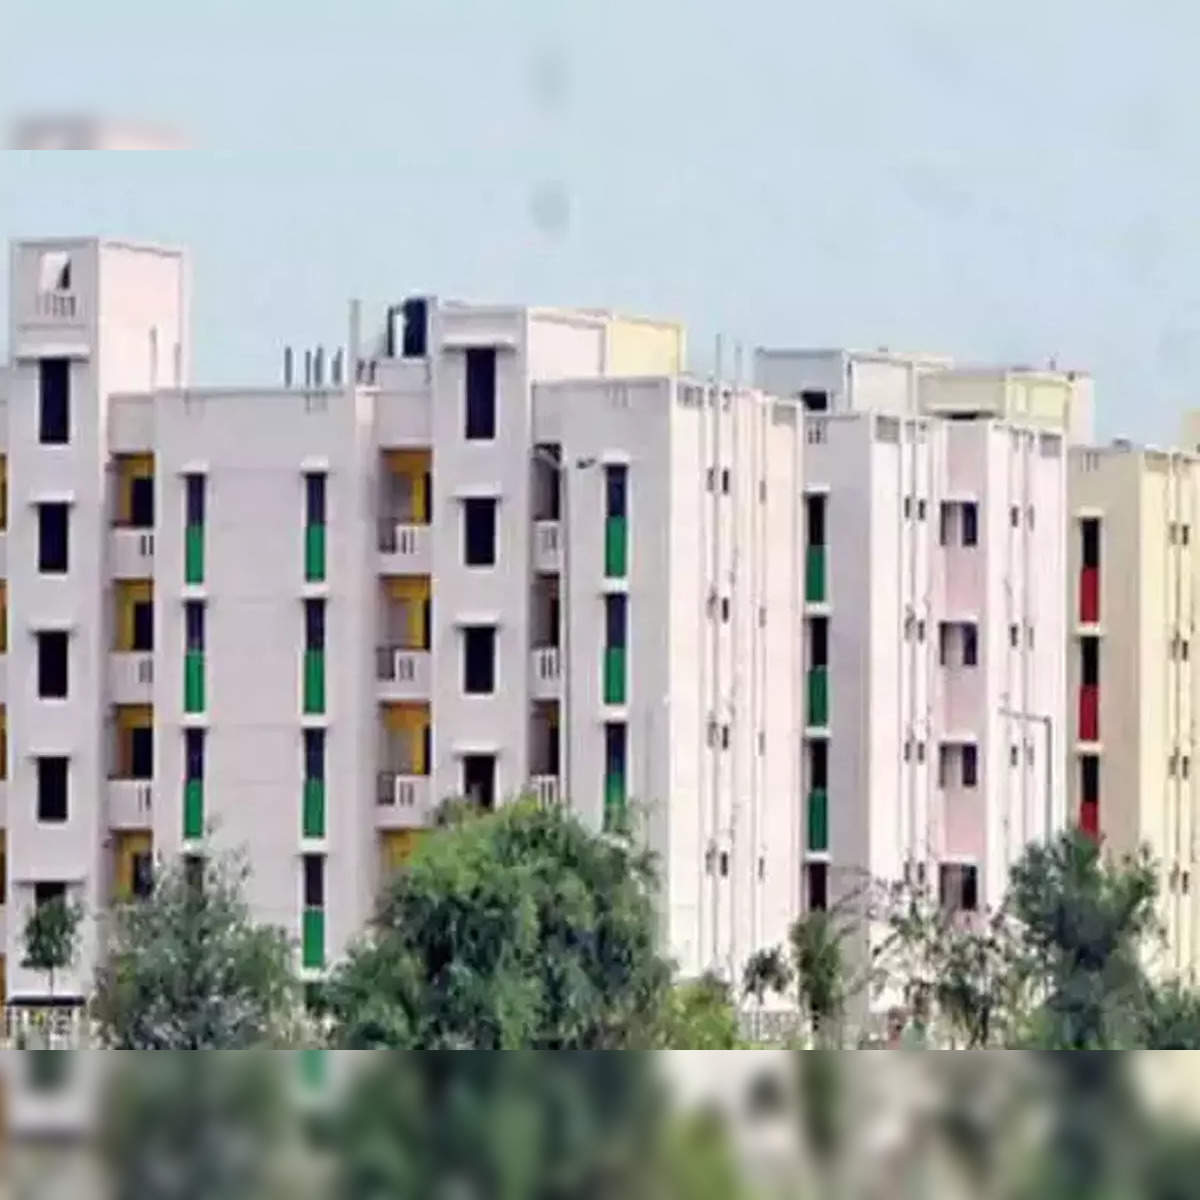 Why people are not buying dda flats | Why people are not buying DDA flats?  | Money9